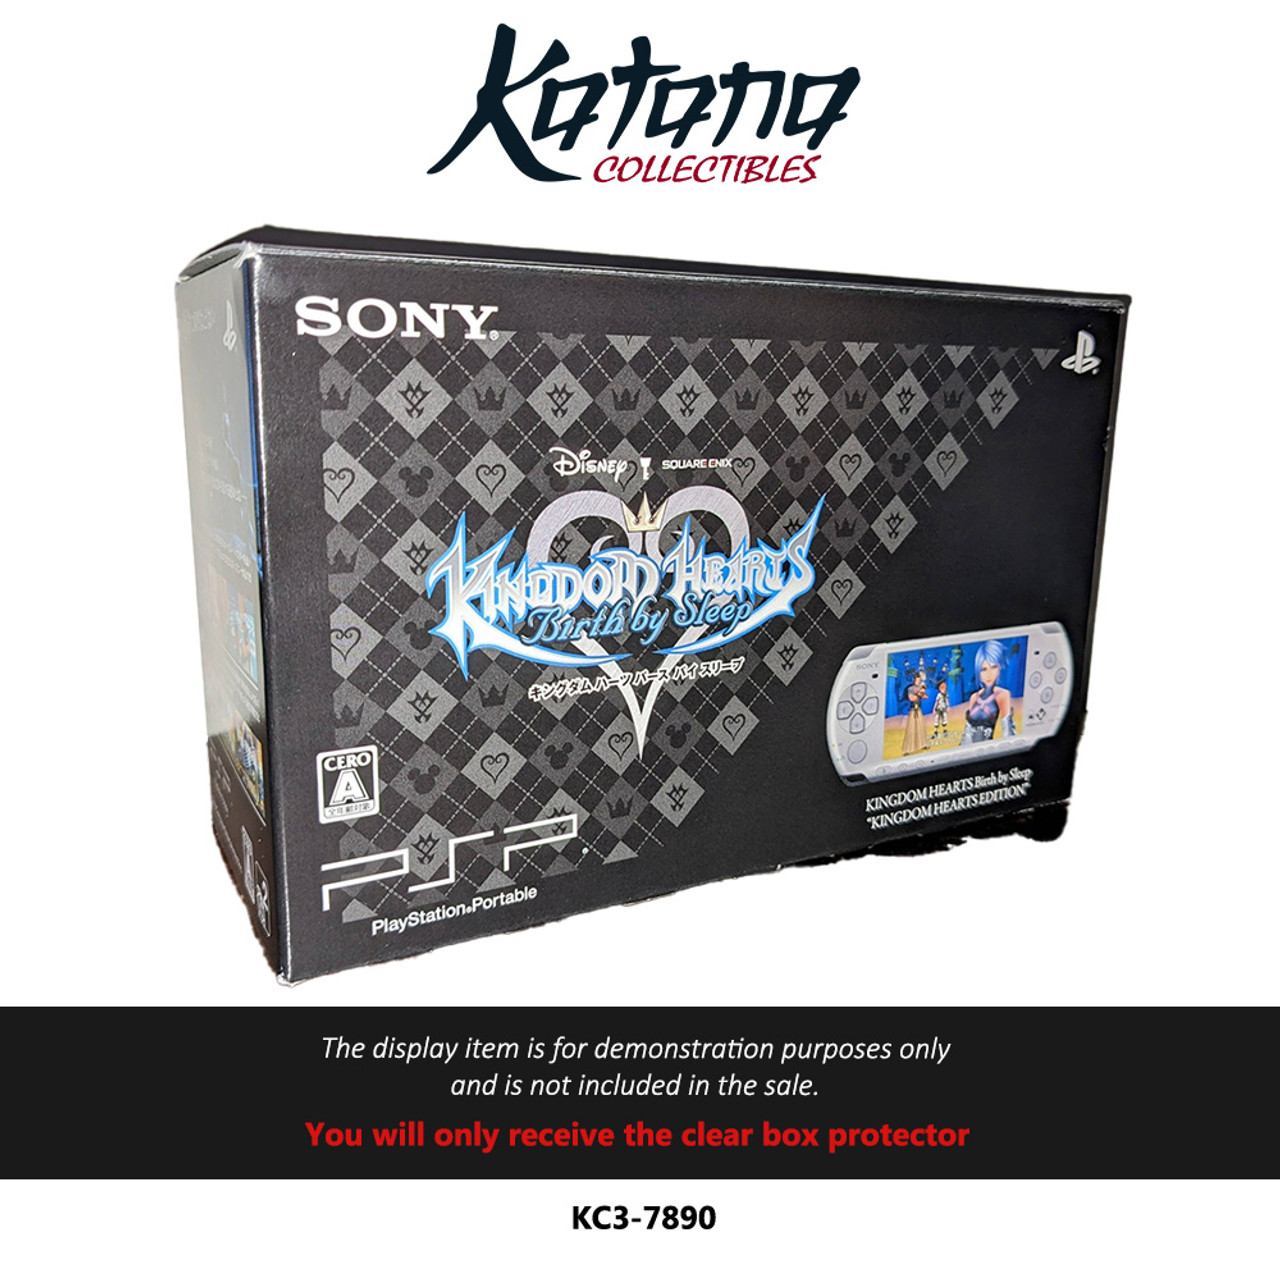 Katana Collectibles Protector For Japan Exclusive Kingdom Hearts: Birth by Sleep Edition Sony PSP-3000 Console and Game Bundle